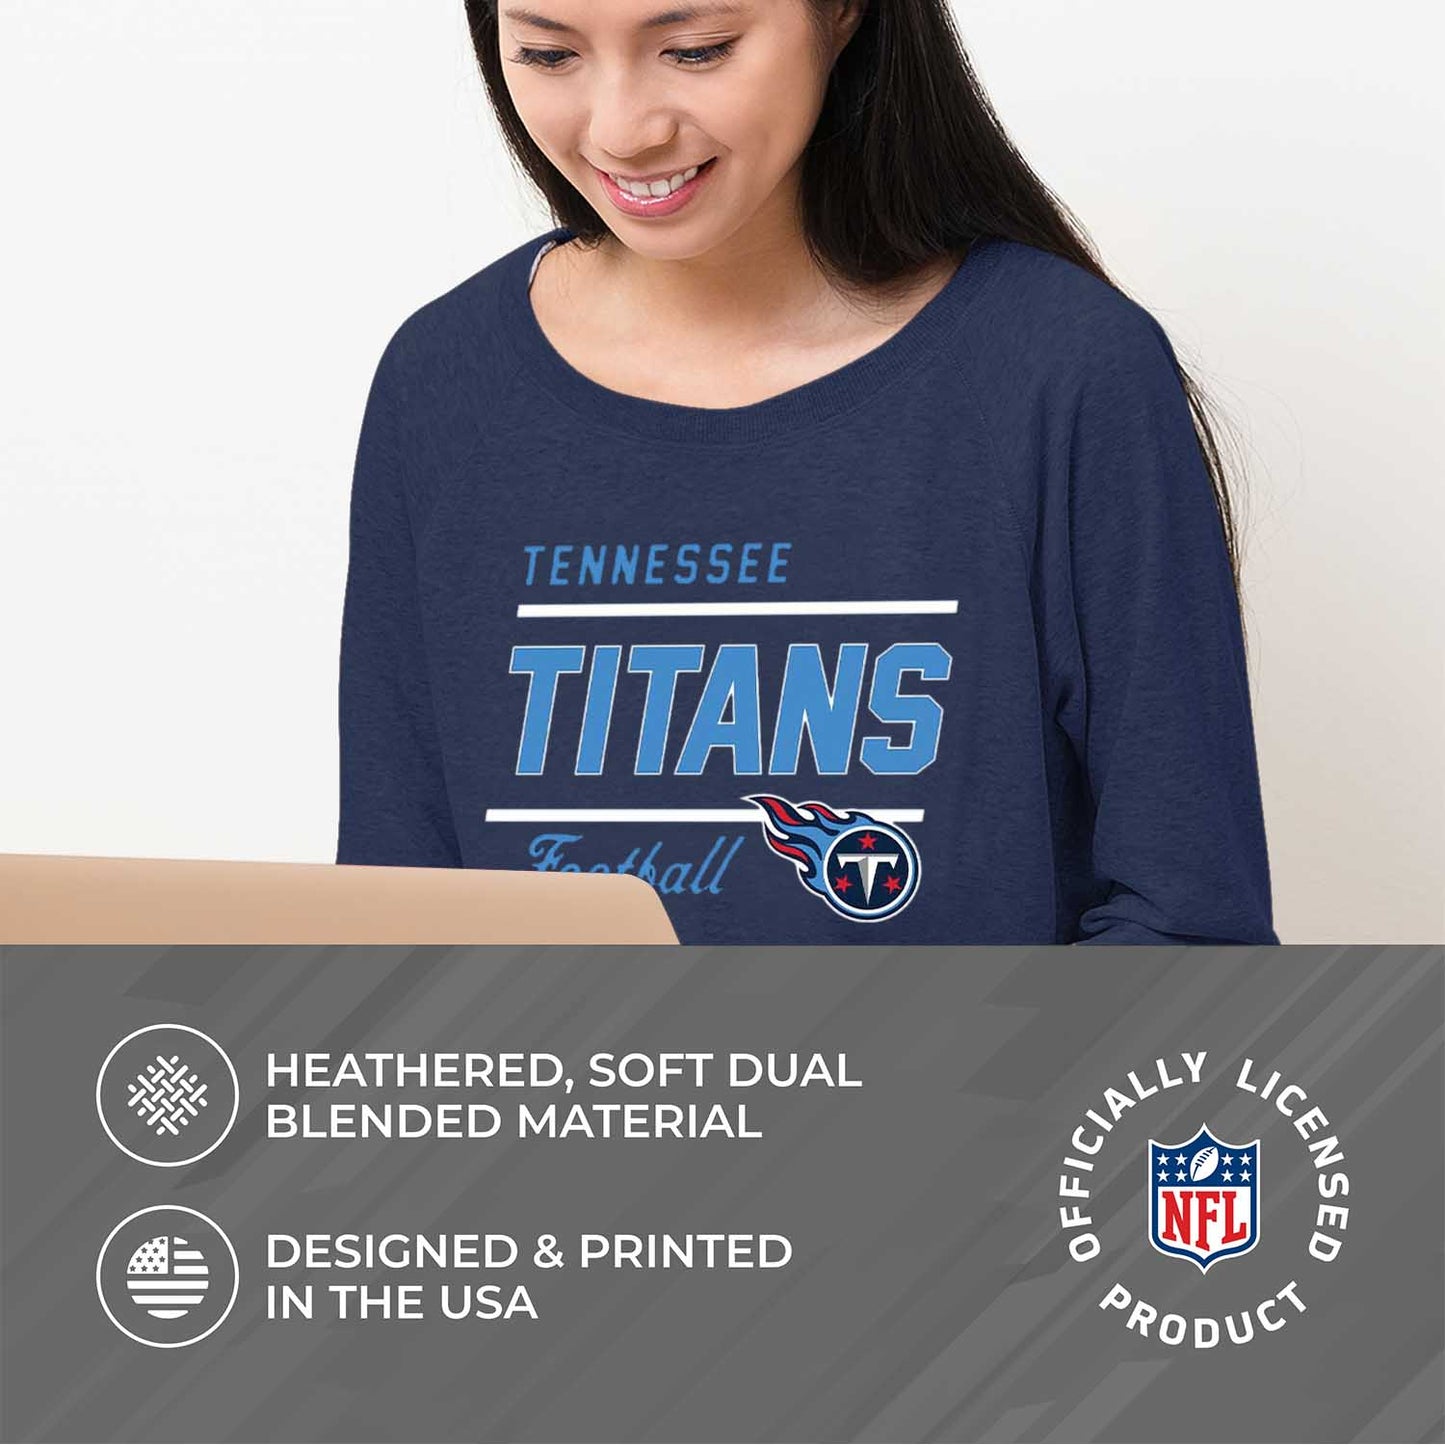 Tennessee Titans Tennessee Titans NFL Womens Crew Neck Light Weight